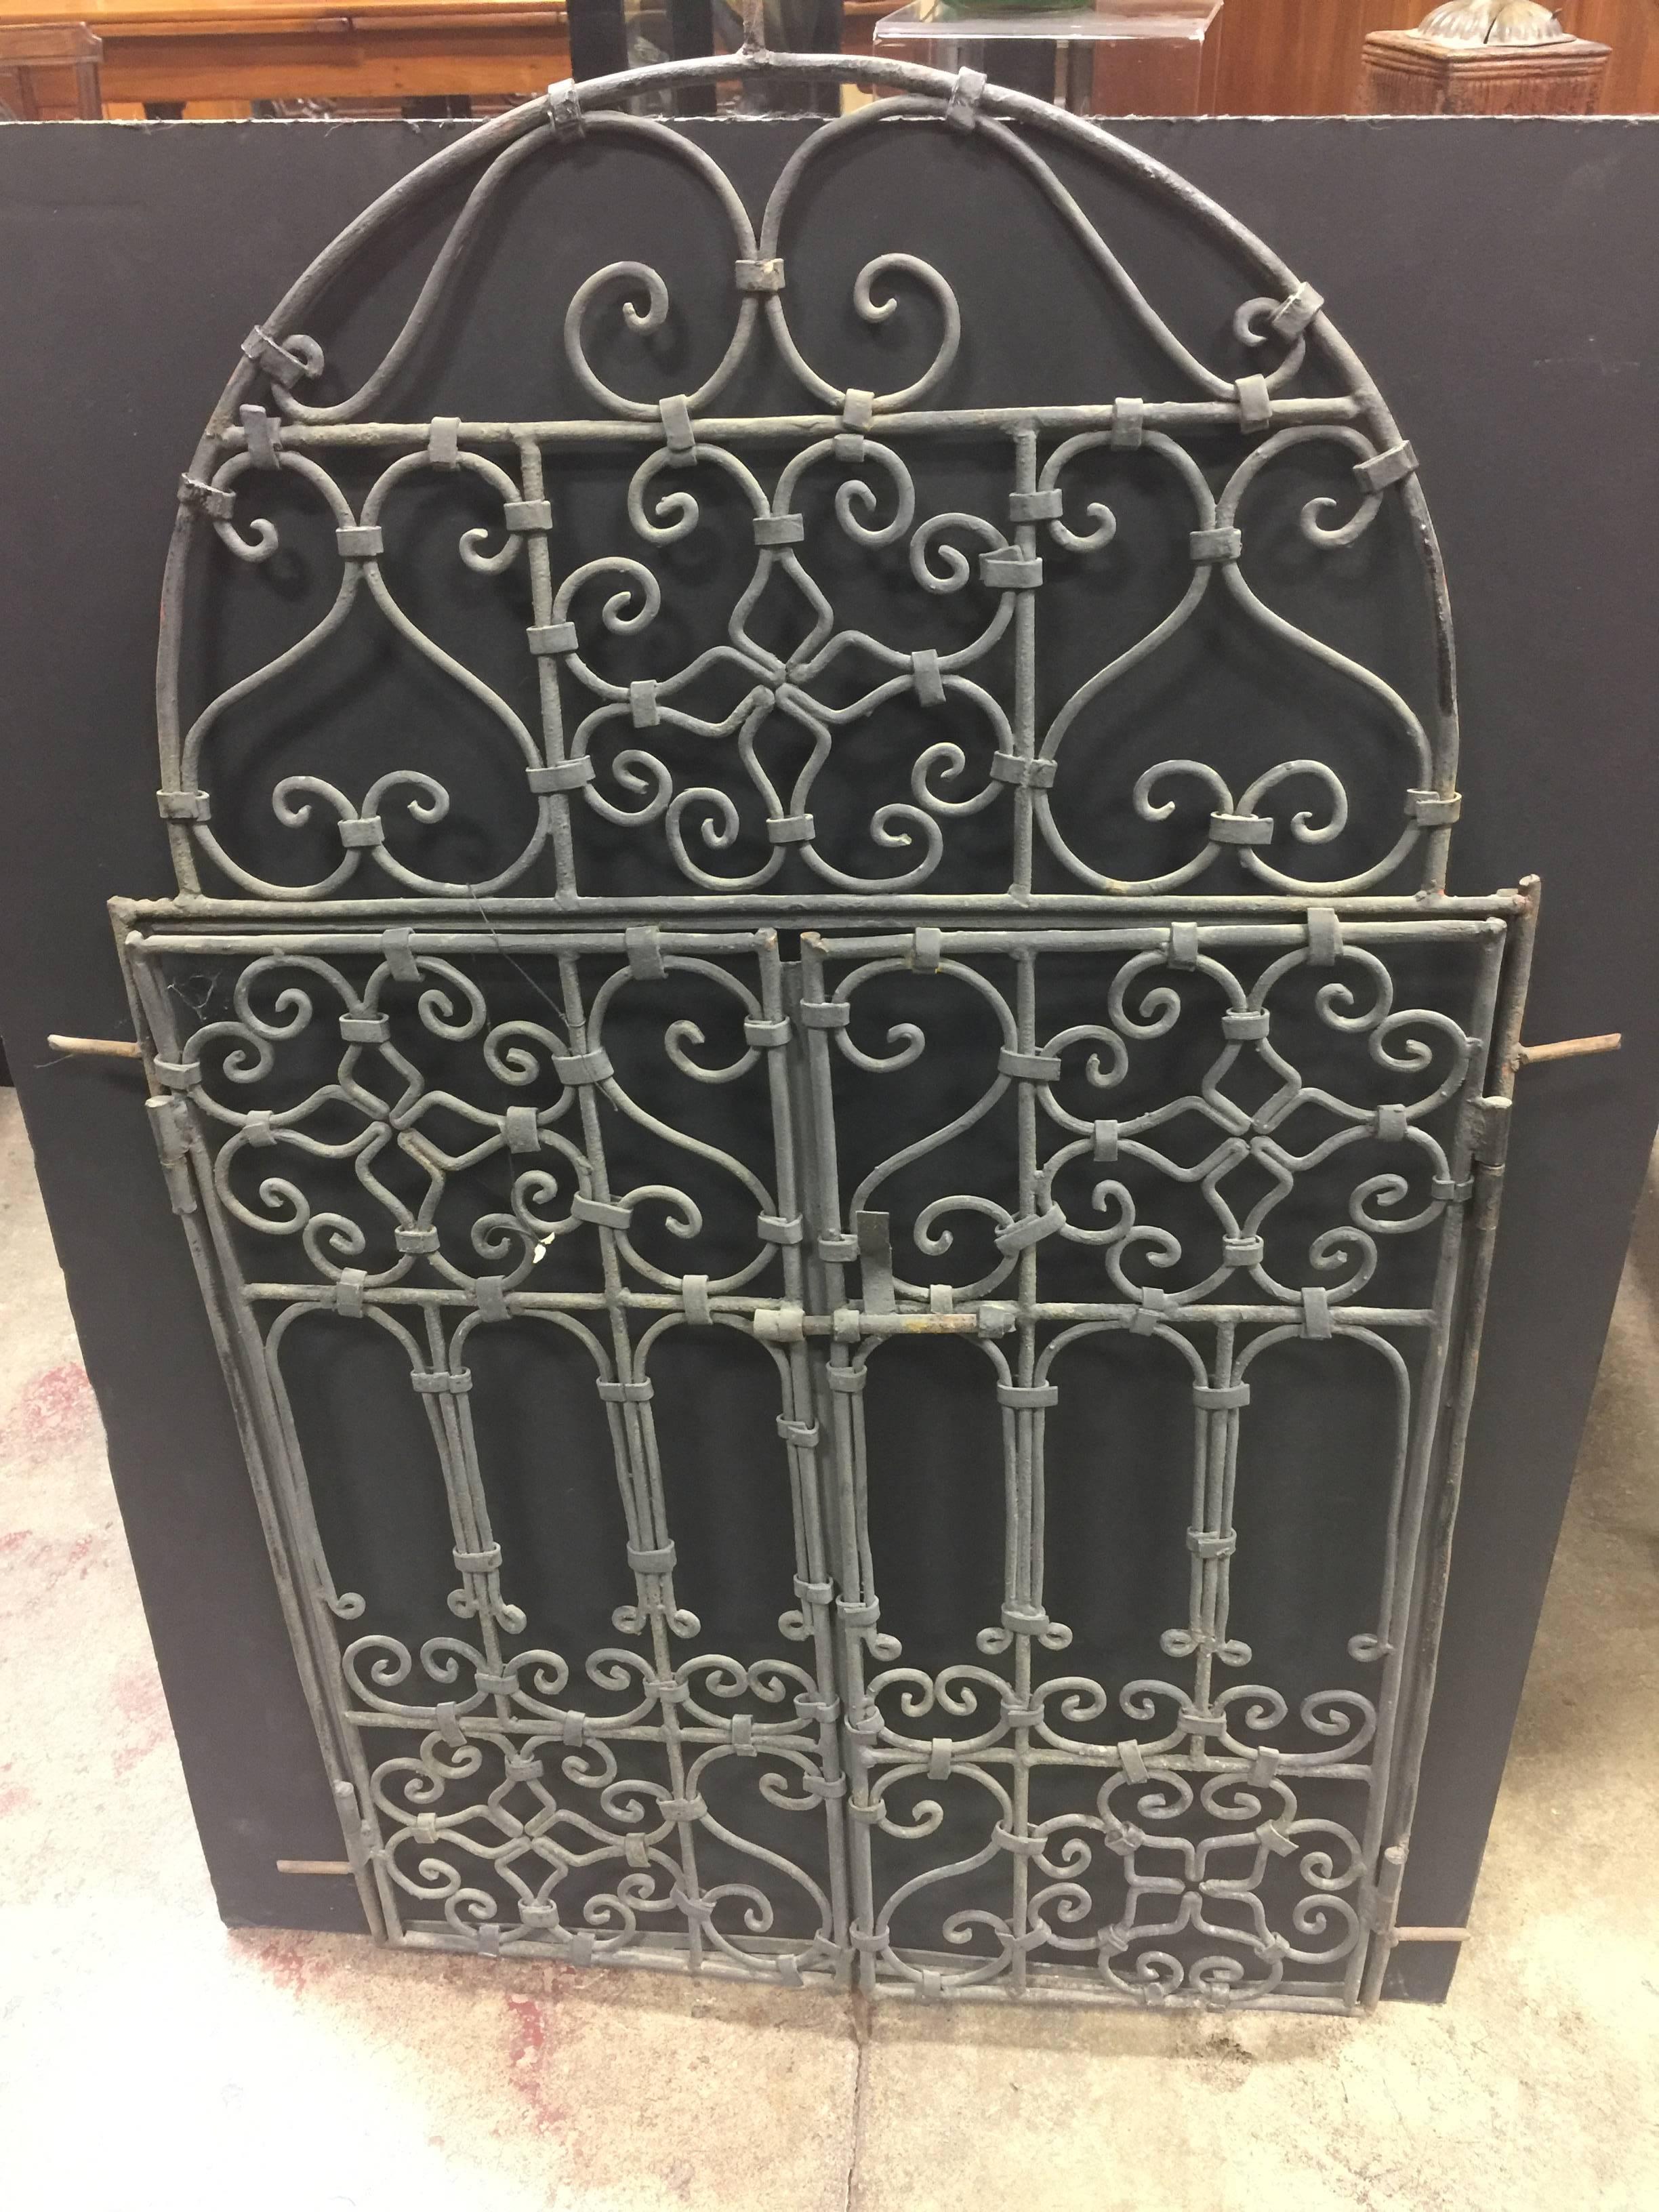 Late 19th century French iron gates
can be used many ways great as decorative hanging.